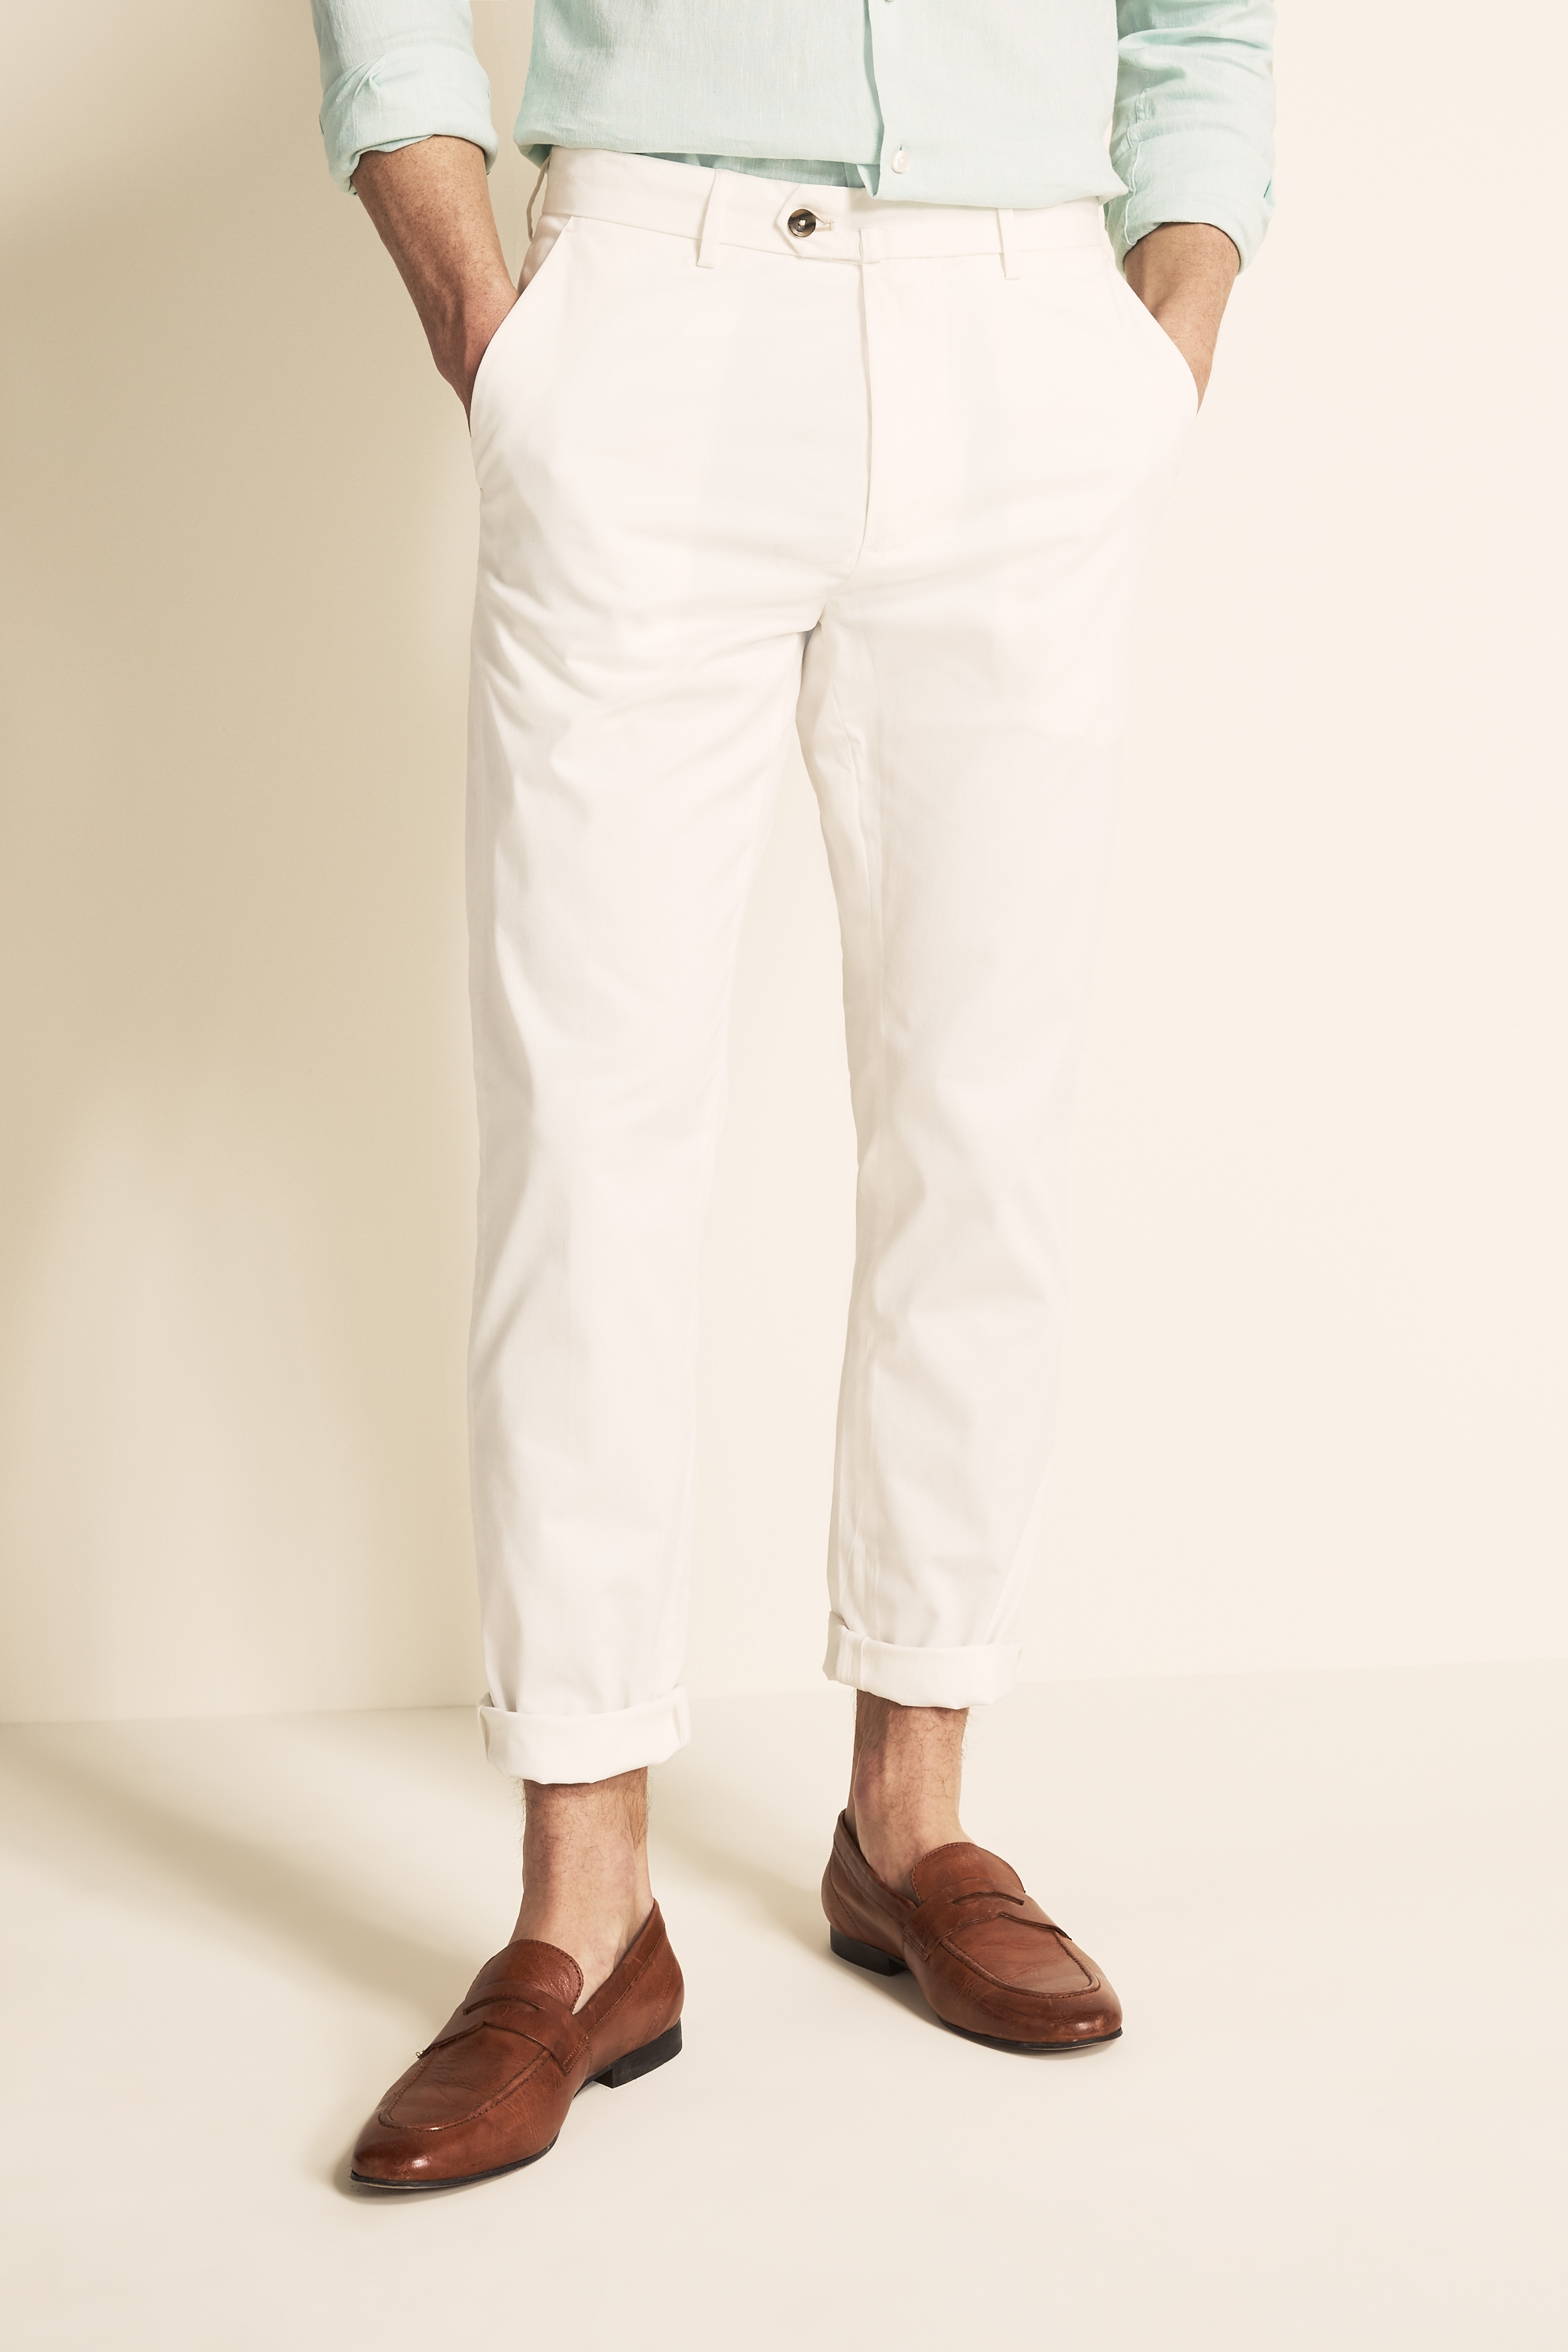 Tailored Fit White Eco Stretch Chino | Buy Online at Moss